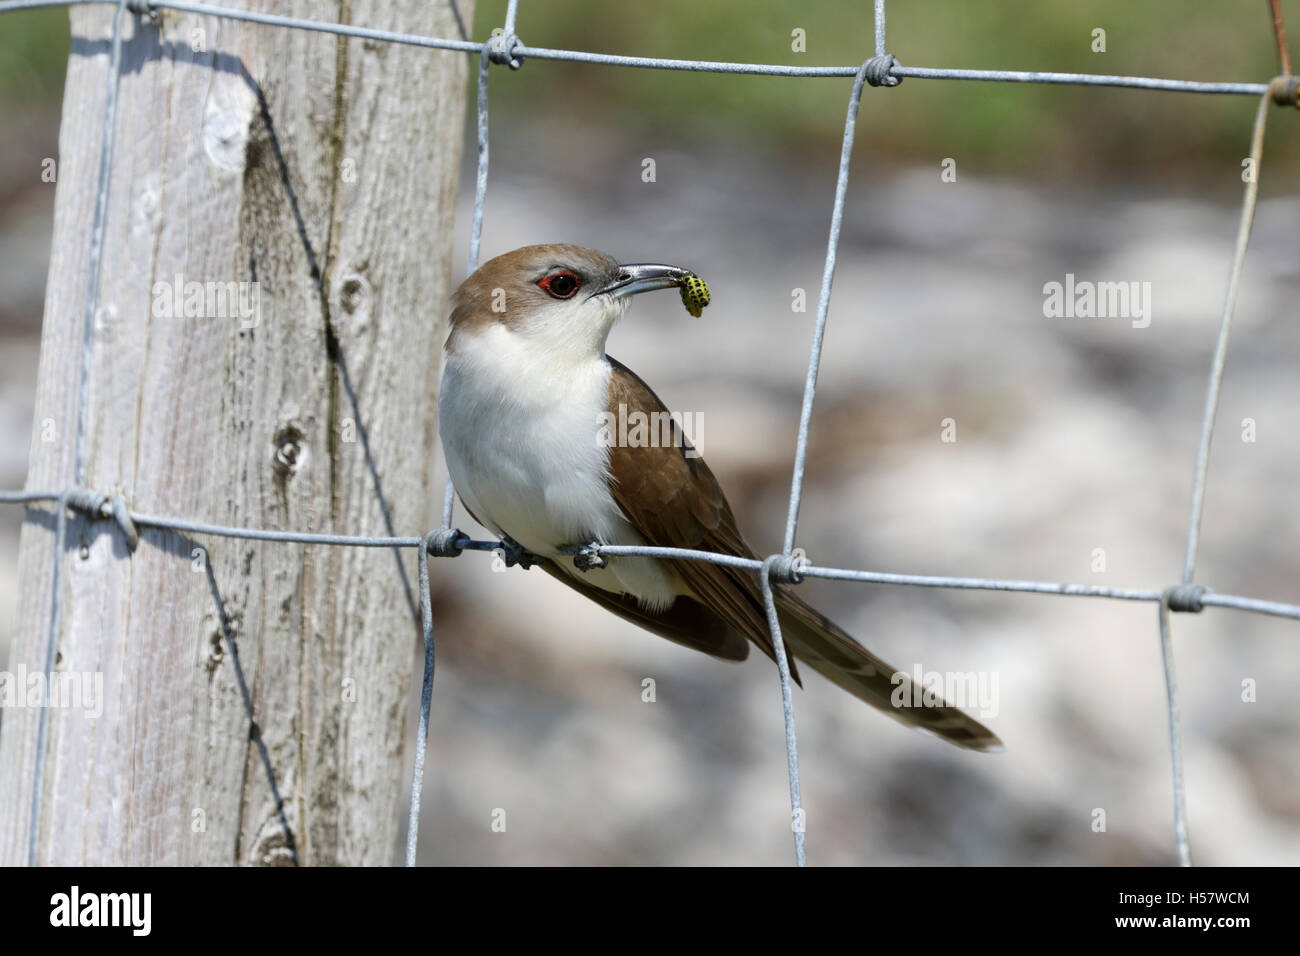 Black-billed Cuckoo, Coccyzus erythropthalmus photographed in the Bayhead Paiblesgarry area, Isle Of North Uist, Outer Hebrides. Stock Photo